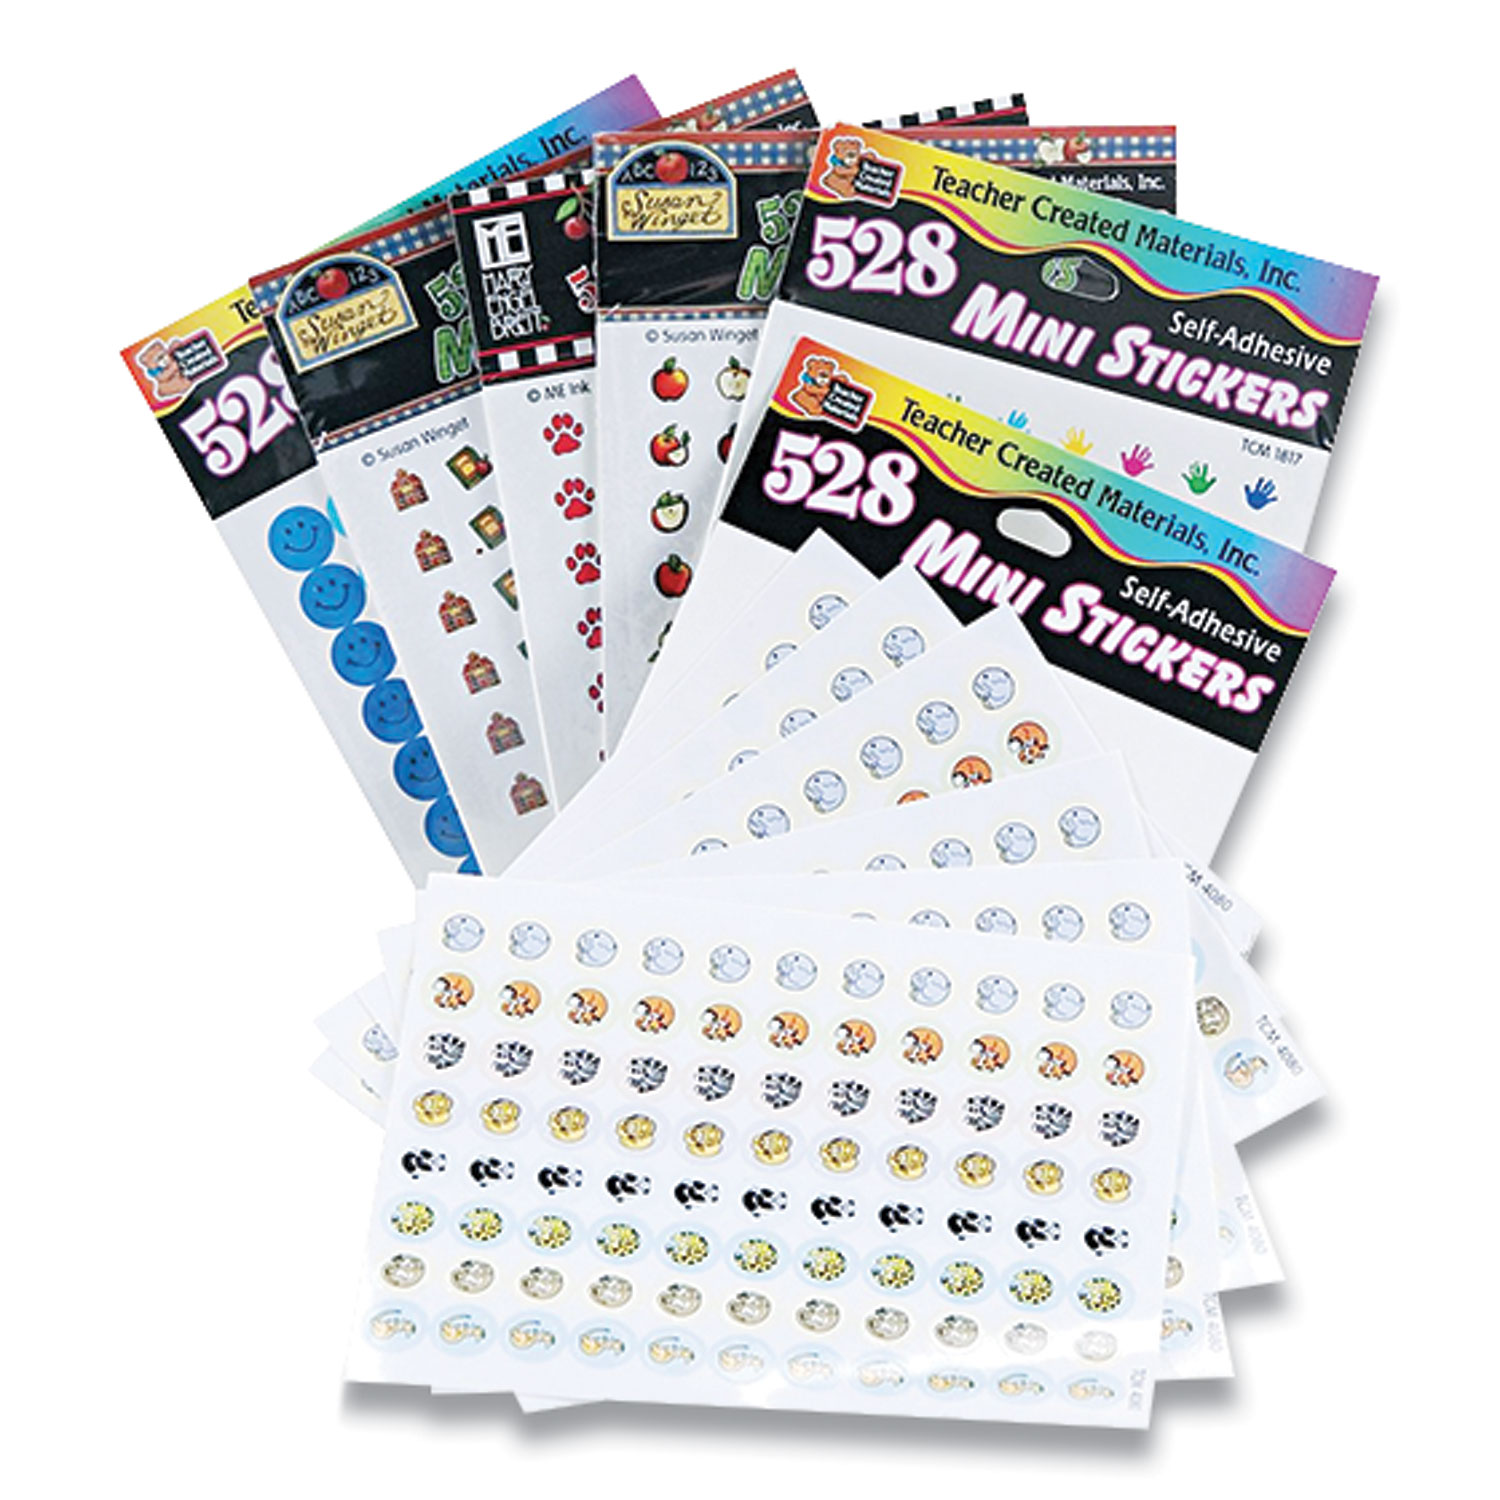 Teacher Created Resources Mini Stickers Variety Pack, Six Assorted Designs, 3,168 Stickers